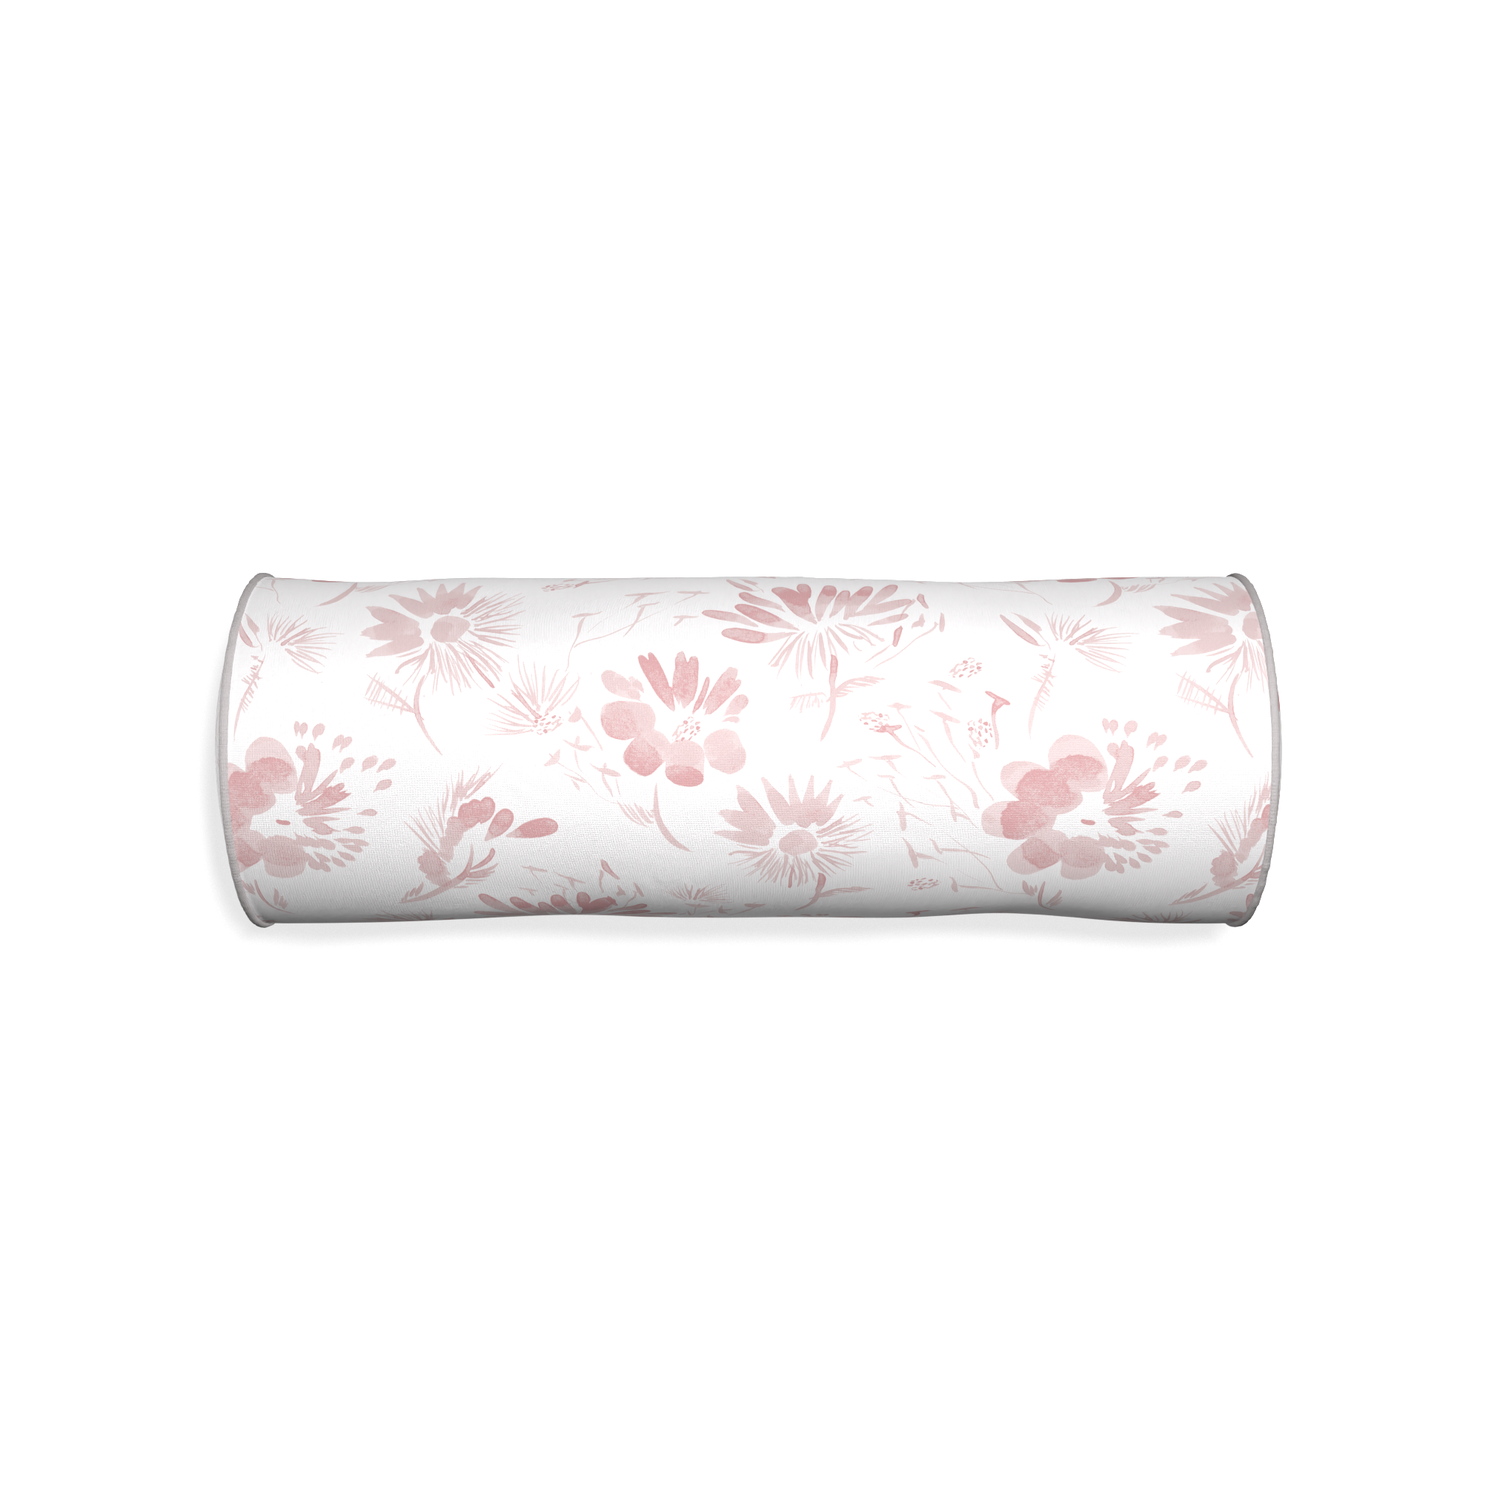 Bolster blake custom pink floralpillow with pebble piping on white background